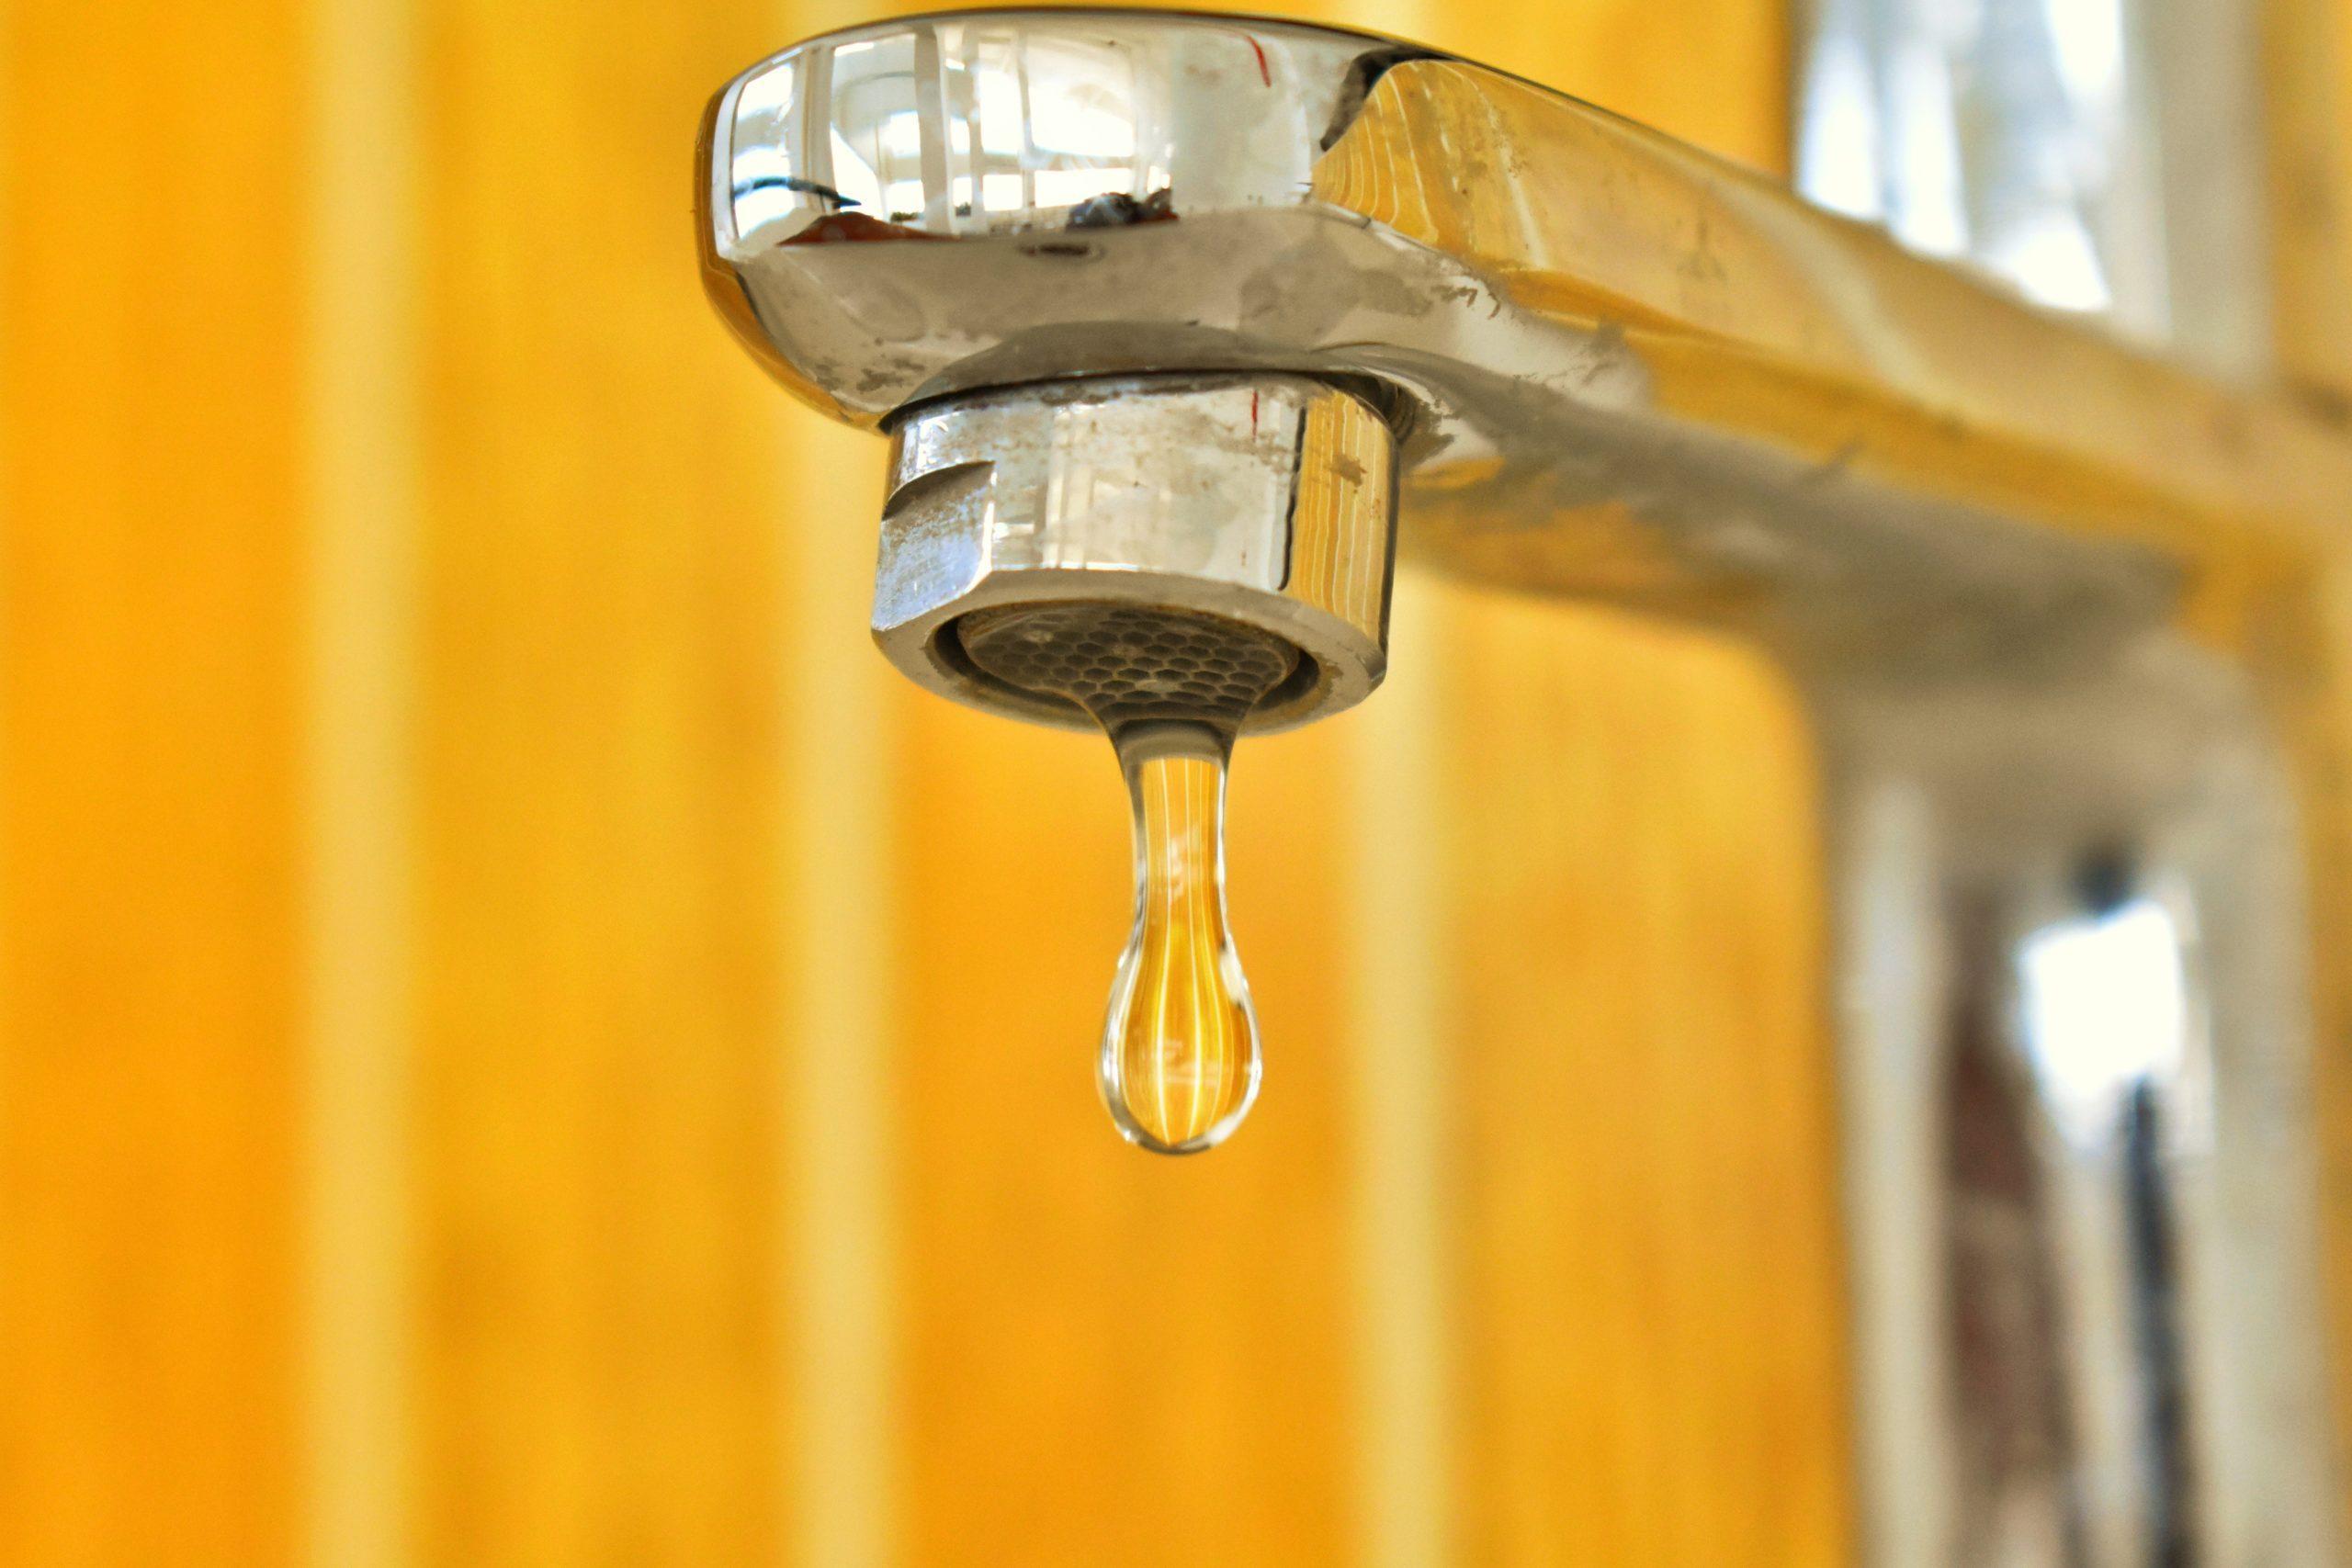 A close-up of a water tap